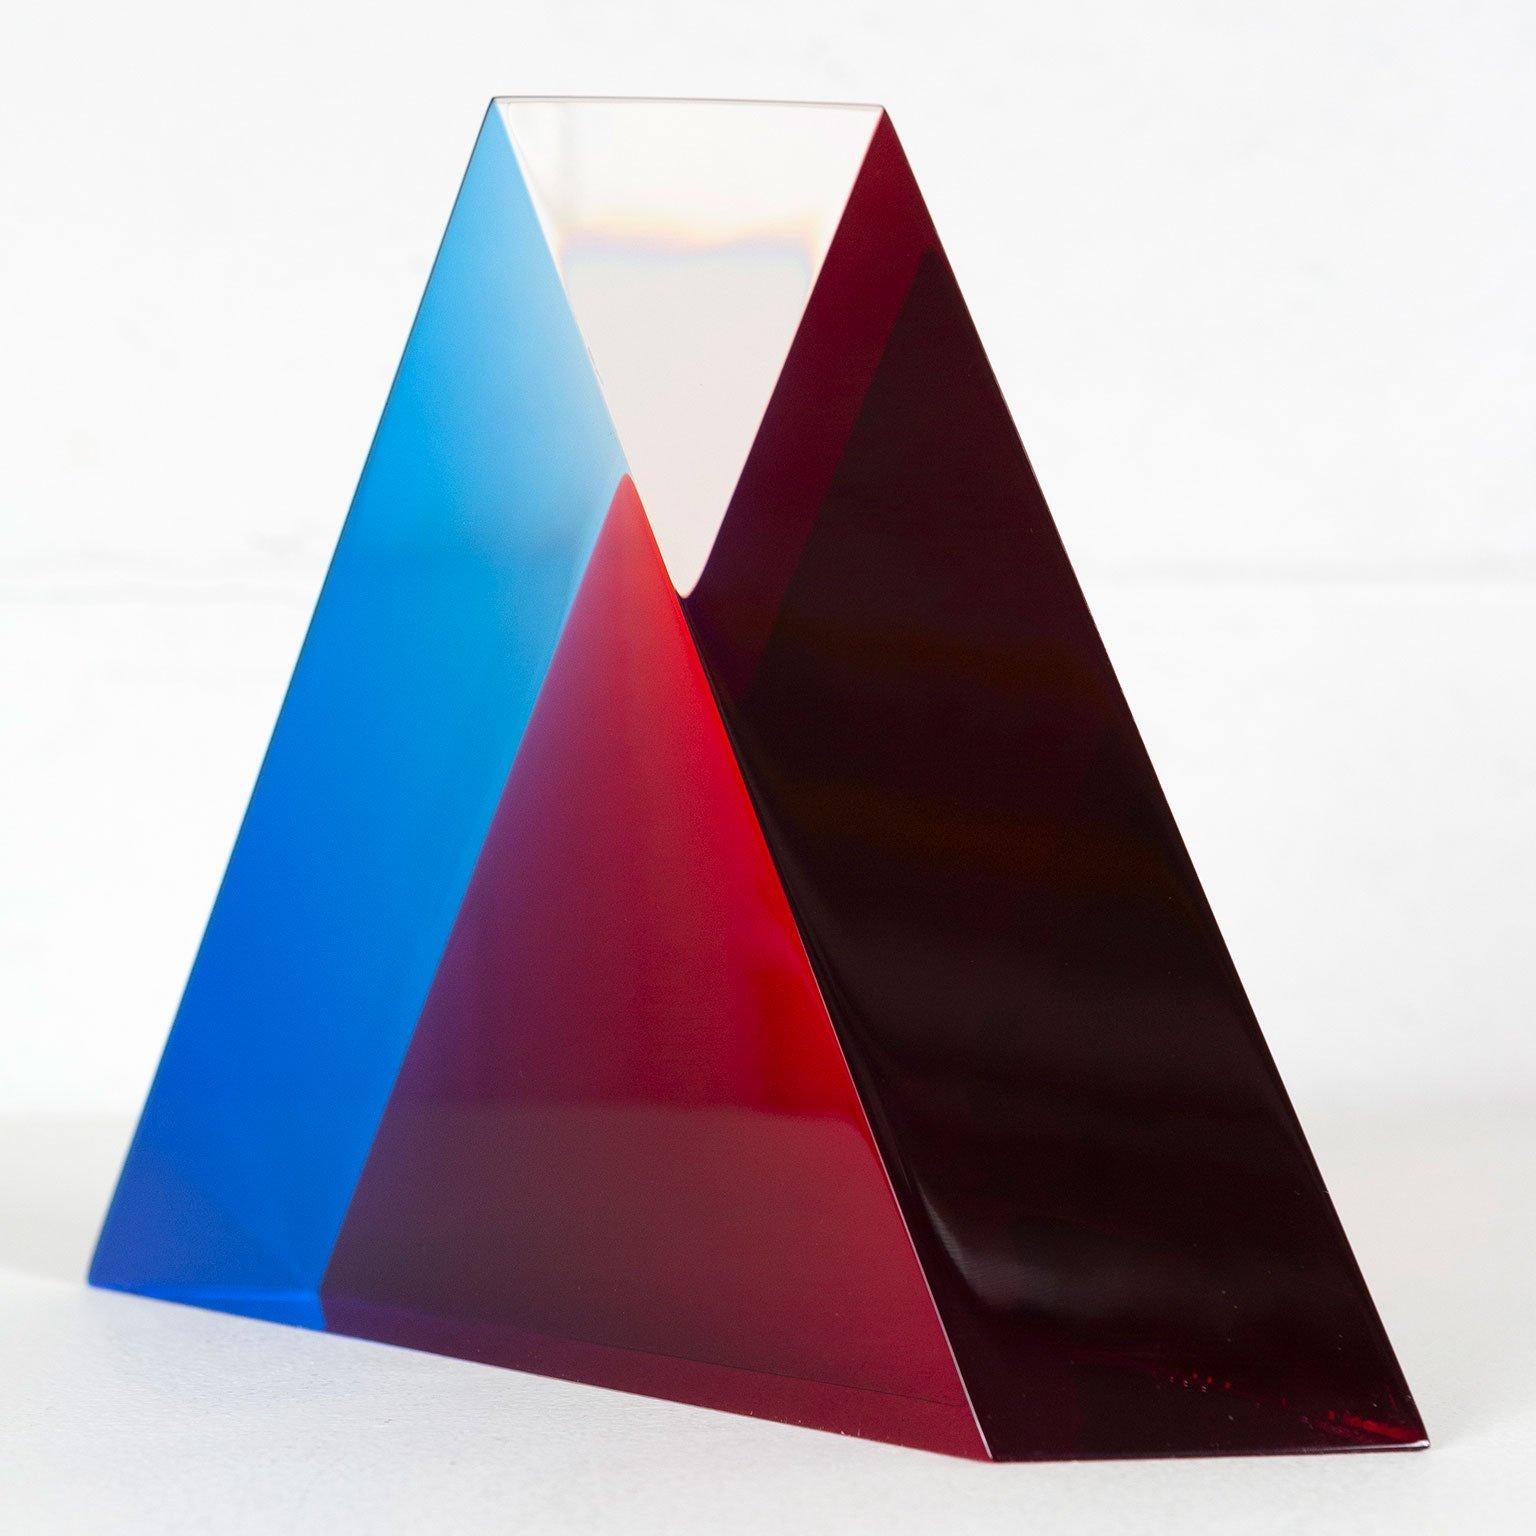 This early and impactful color-shifting triangle is a paradigm of Vasa Mihich's mastery of acrylic. 

In 